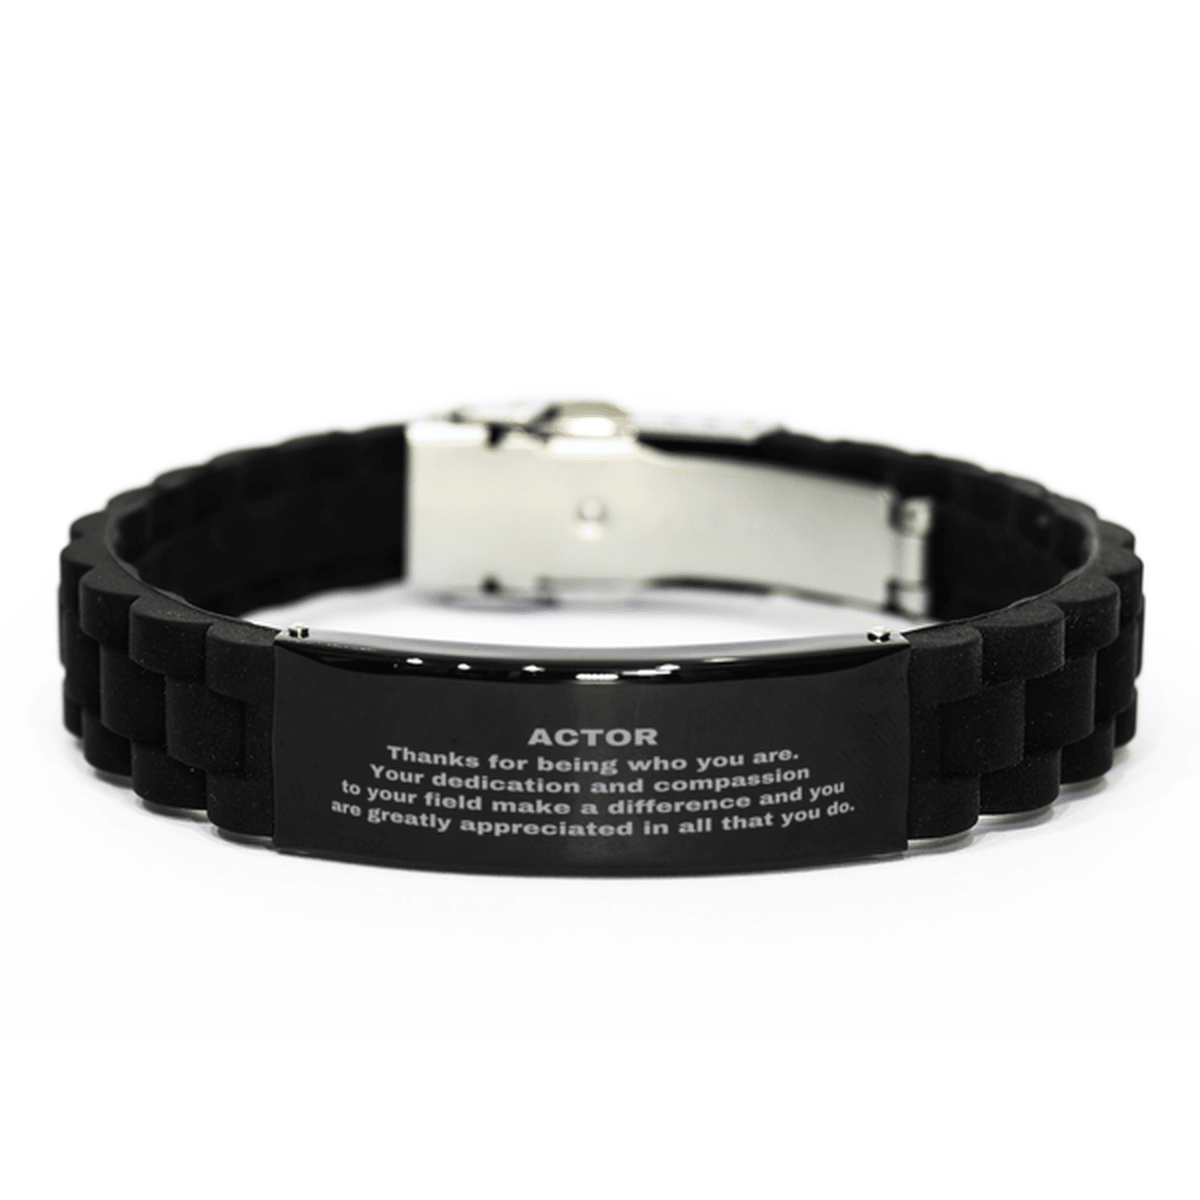 Actor Black Glidelock Clasp Engraved Bracelet - Thanks for being who you are - Birthday Christmas Jewelry Gifts Coworkers Colleague Boss - Mallard Moon Gift Shop